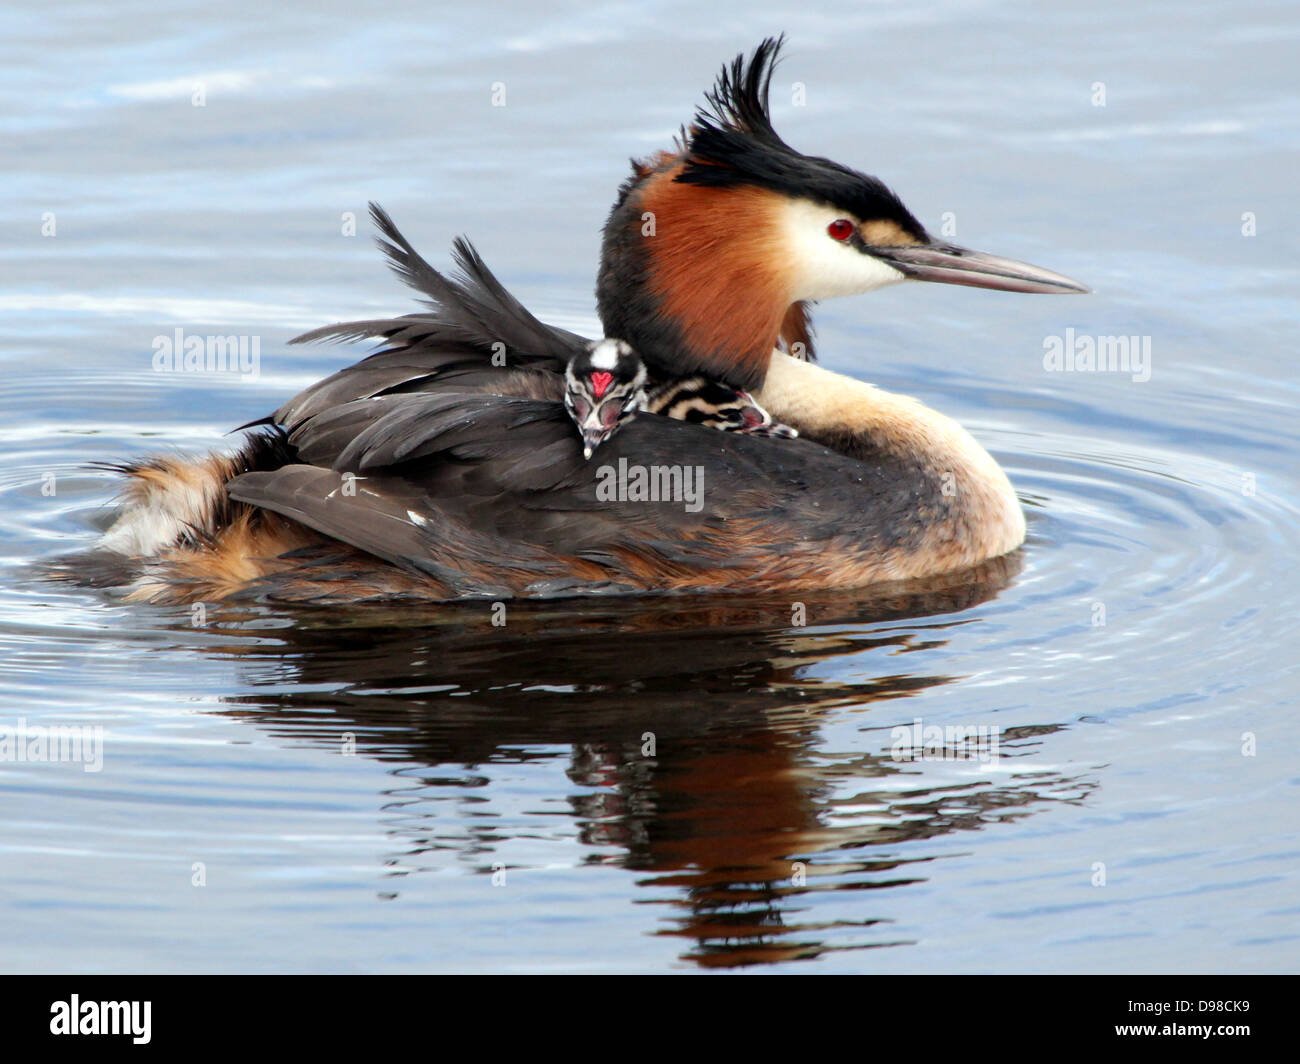 Great Crested Grebes (Podiceps cristatus) with grebes riding piggy-back & being fed by their parents (over 30 images in series) Stock Photo